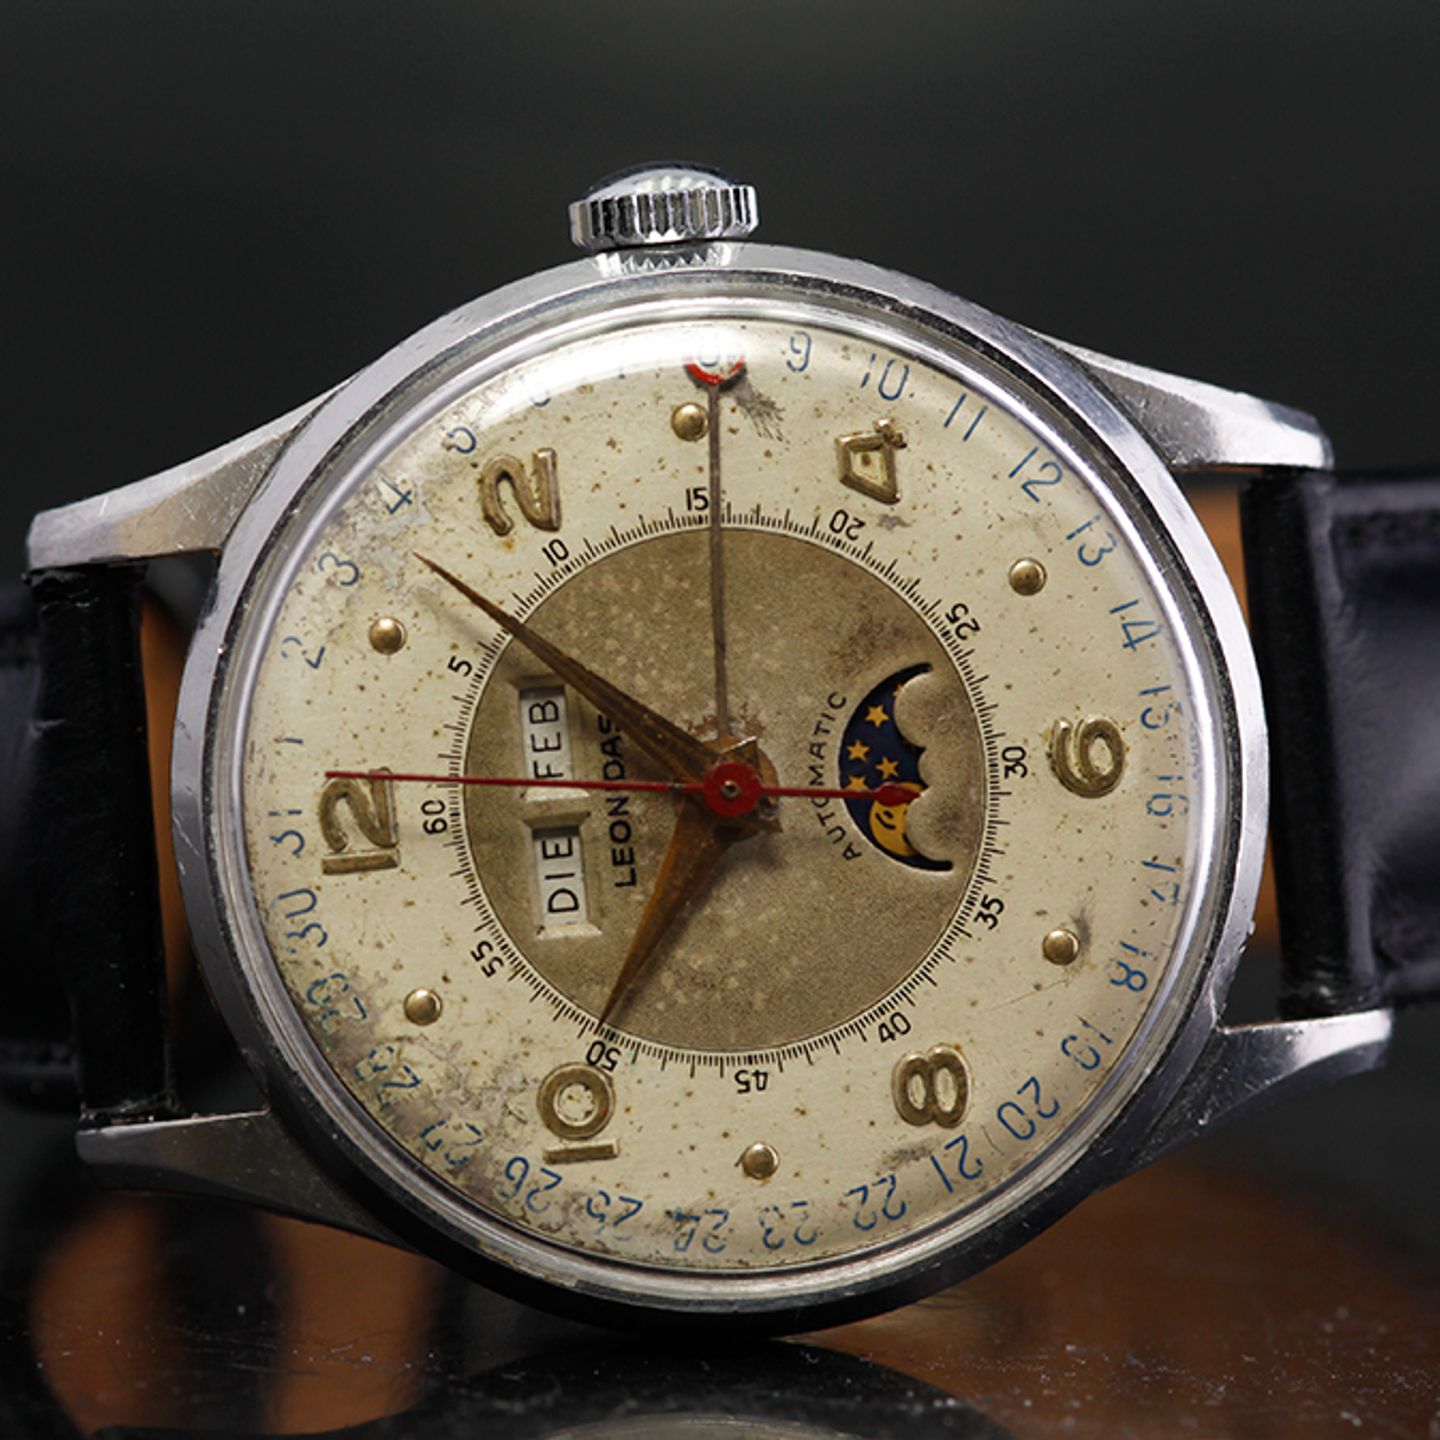 Leonidas Triple Date Moonphase n/a (1950) - White dial 35 mm Steel case (1/5)